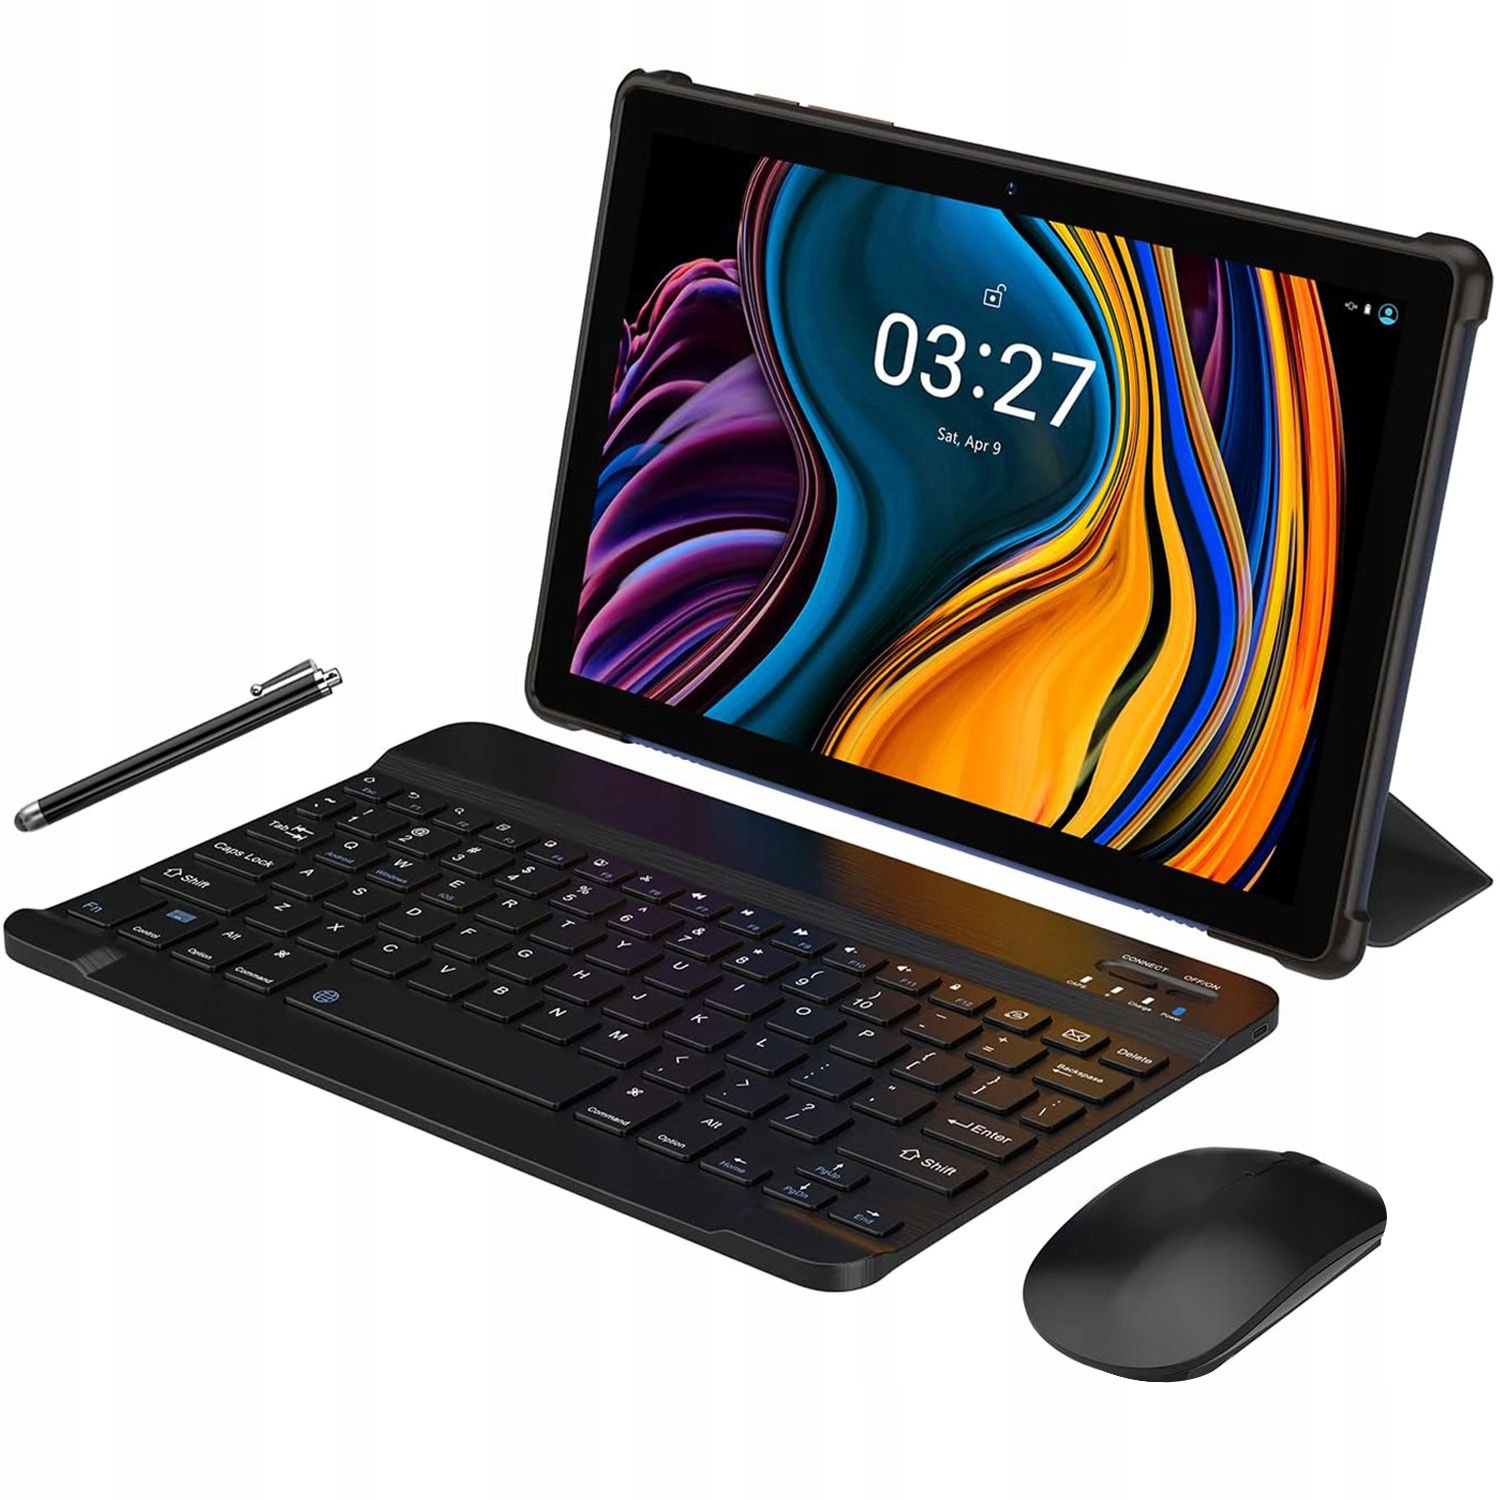 YOTOPT Tablette 10 Pouces Android 13, 5G WiFi Octa-Core 2.0 GHz, 19 GB RAM,  128 GB ROM (TF 1TB Extensible), 5MP+8MP, avec Clavier, Souris, Manche